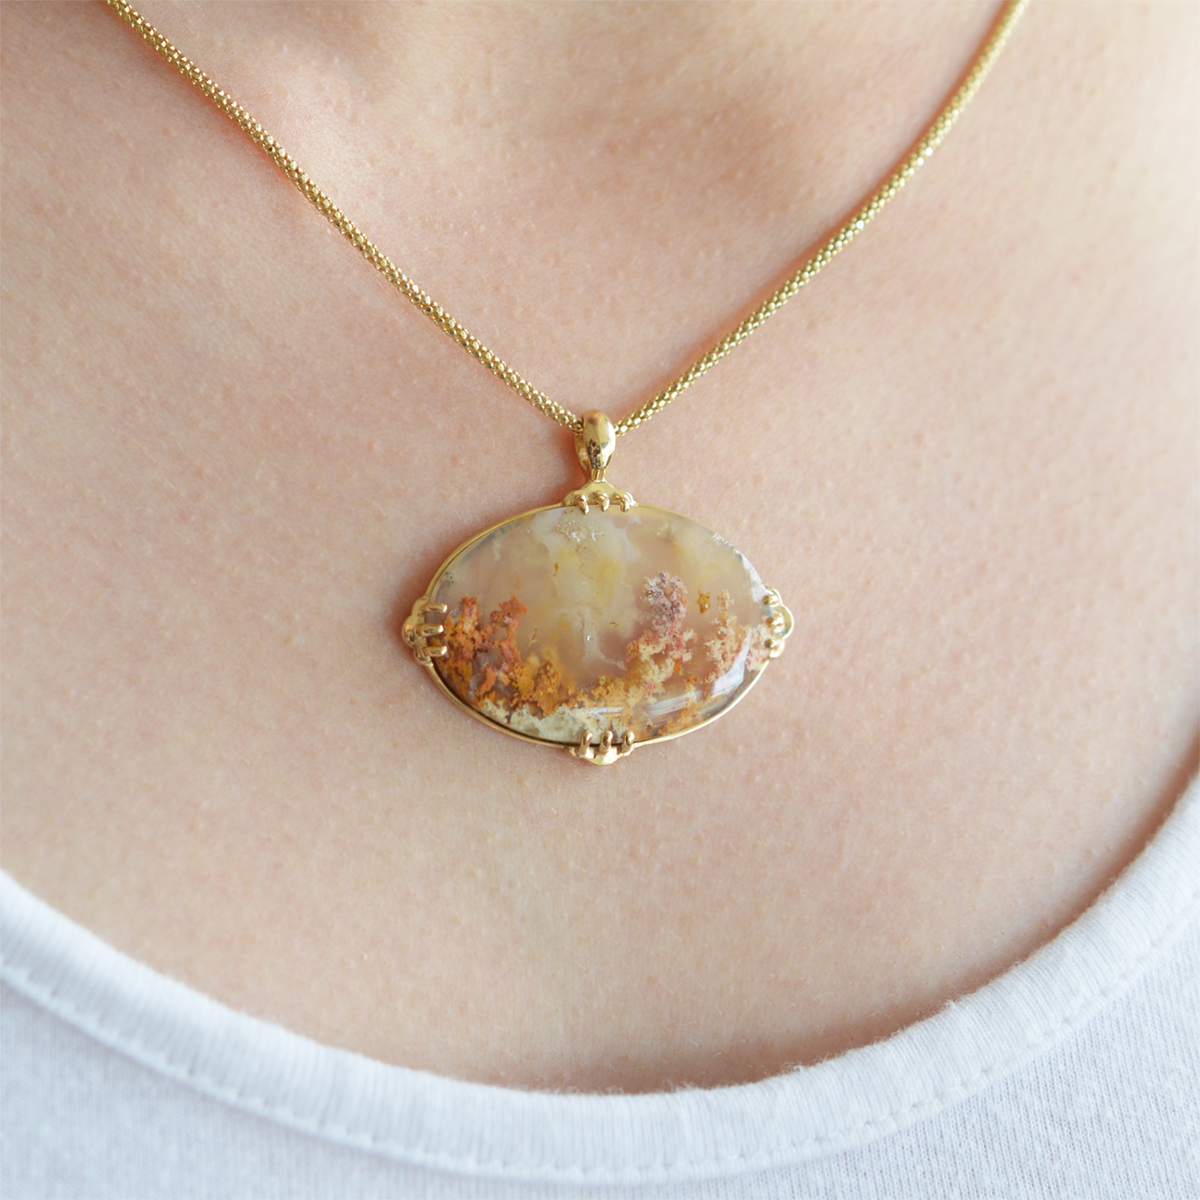 Moss Agate Necklace in 14Kt Yellow Gold - Morgan's Treasure